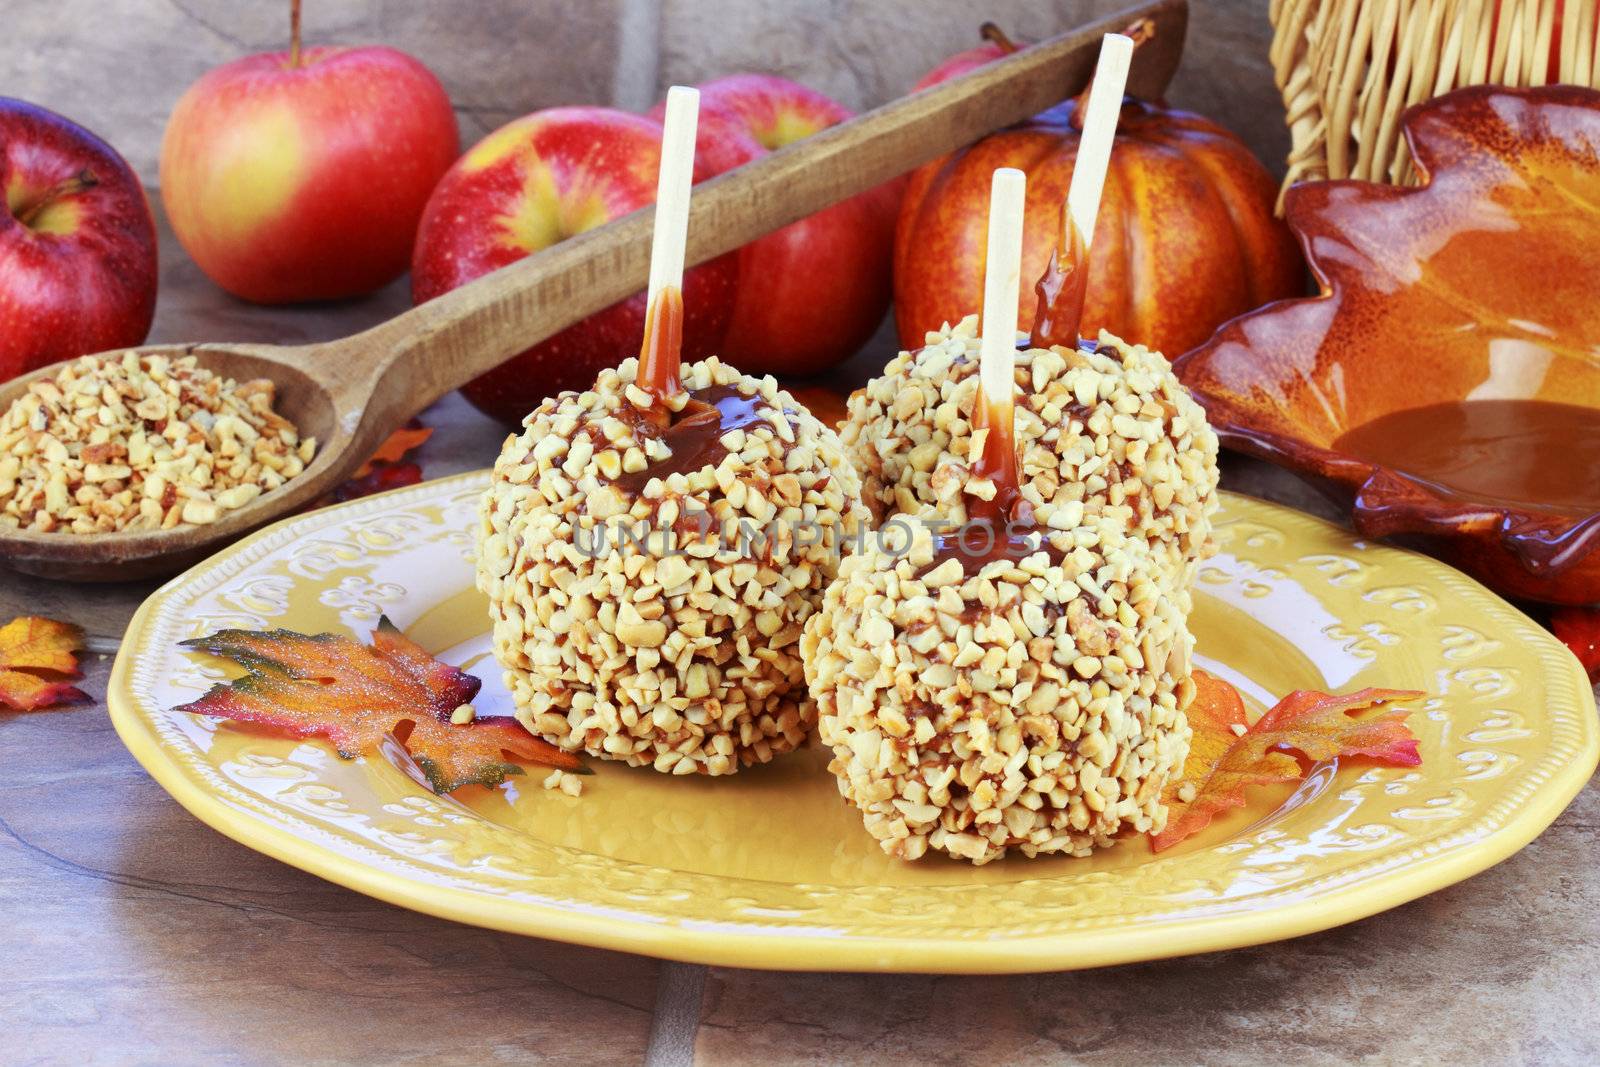 Candy apples with caramel sauce and a fresh ingredients in the background.